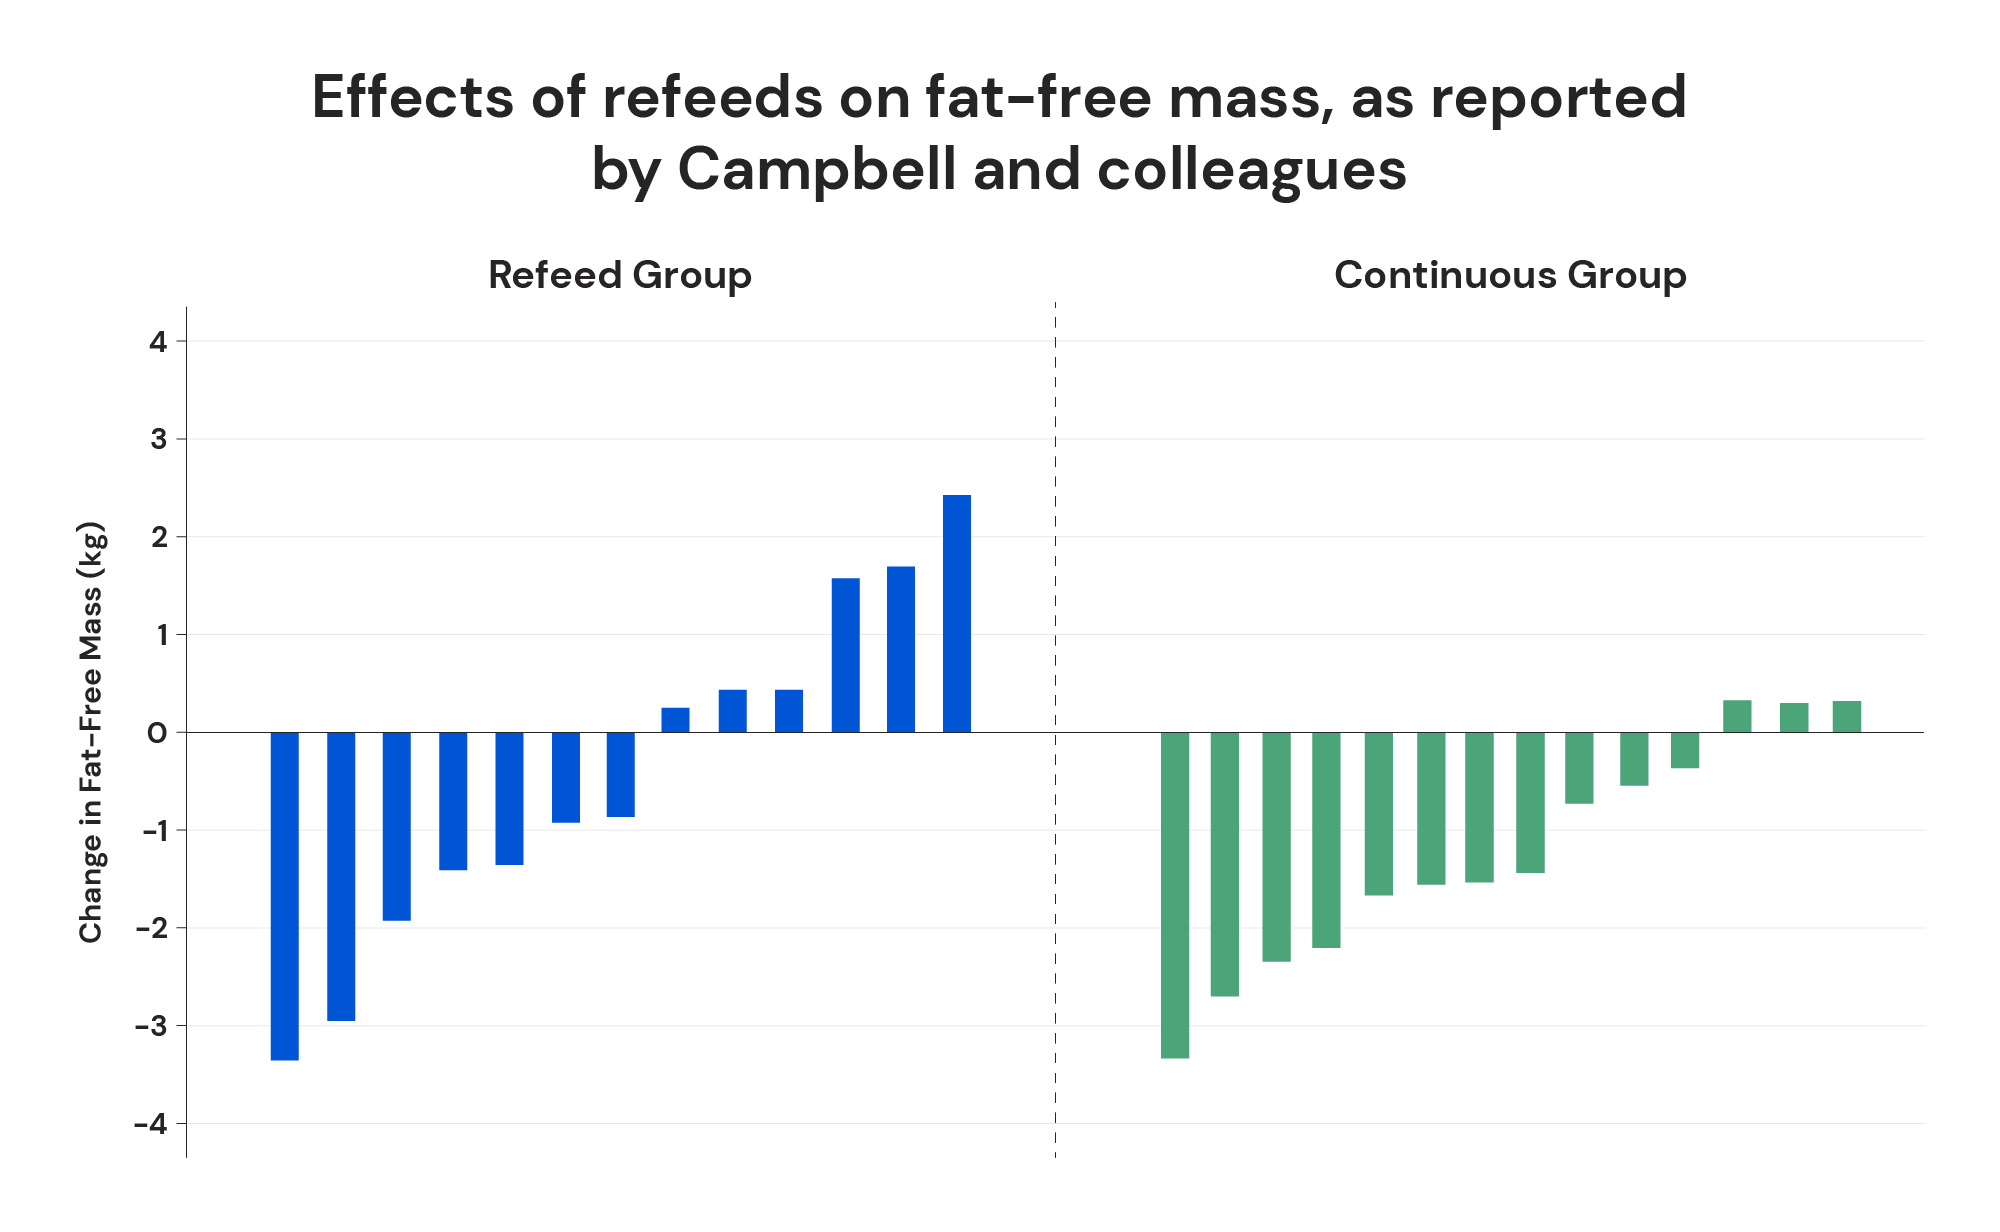 Effects of refeeds on fat-free mass, as reported by Campbell and colleagues